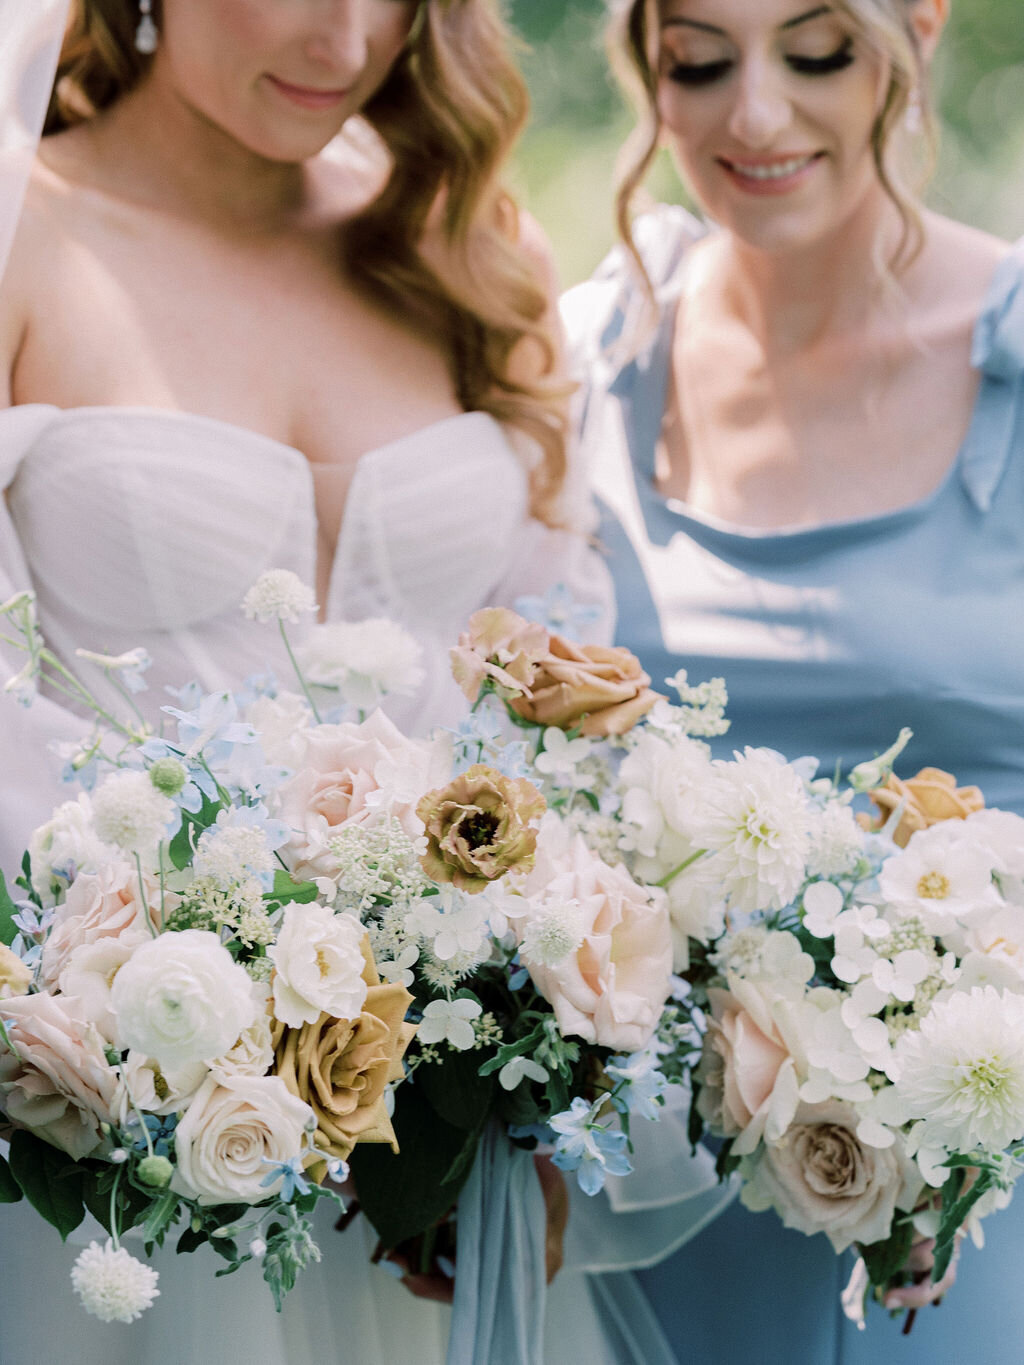 Bride and bridesmaid holding bouquets of peach garden rose, white dahlia, toffee roses, white hydrangea, light blue delphinium and brown lisianthus and blue silk ribbon.